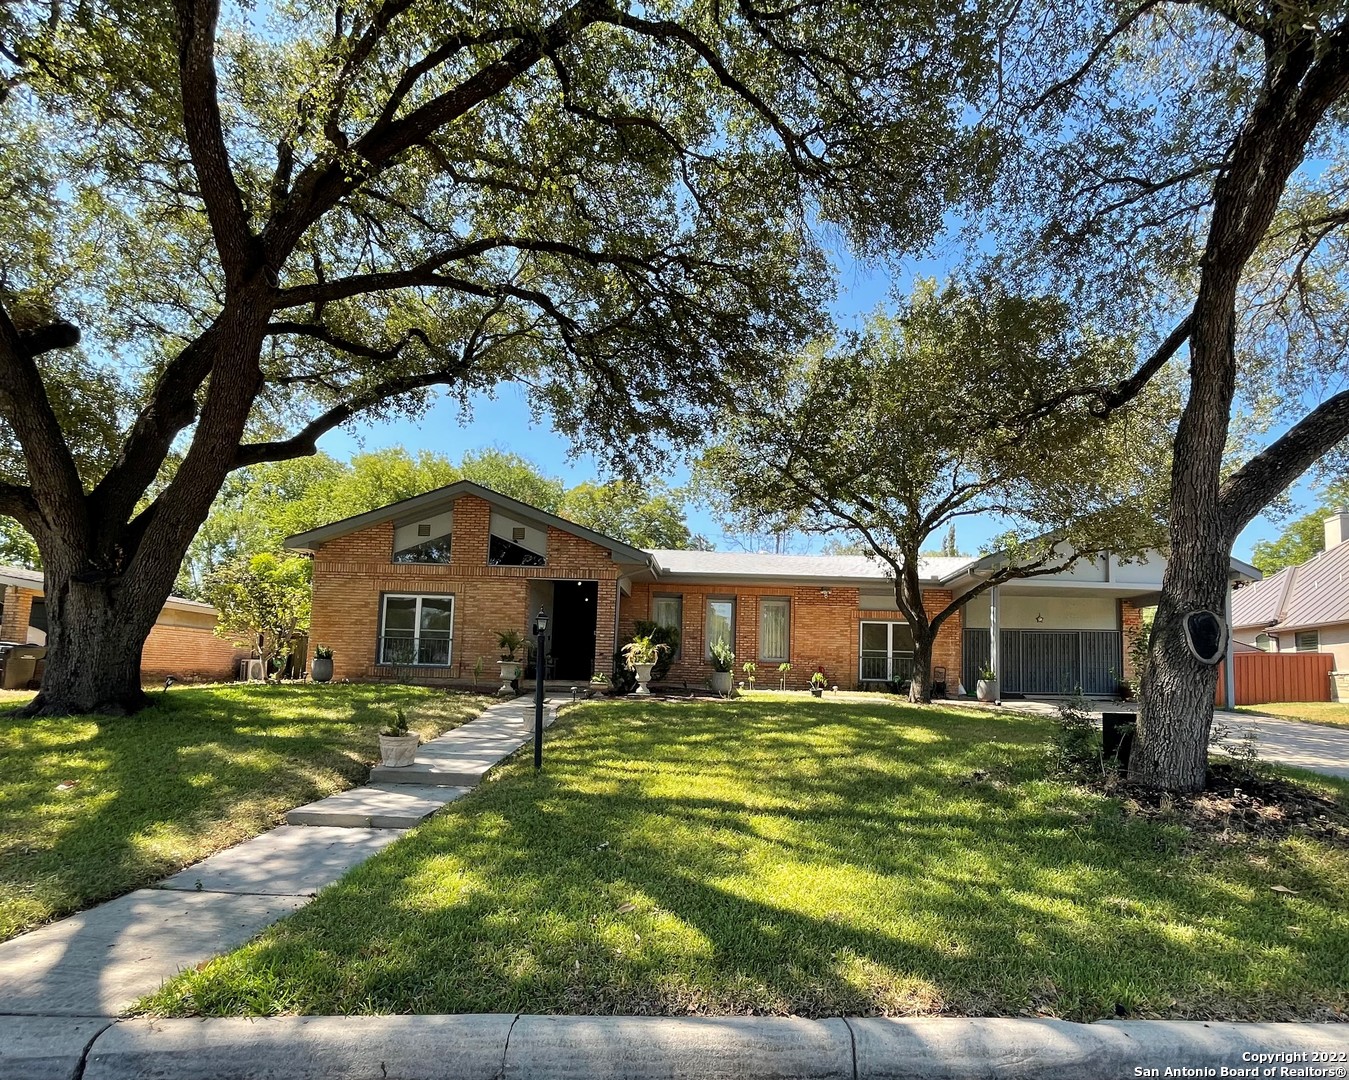 **Come see this beautiful uniquely designed home with 10 foot ceilings in heart of East Shearer Hills.  Home was renovated back in 2011 by raising the roof and adding an extra Master Bedroom, and increasing the total Square Feet to approx. 2,534 as per Seller.  You will see the spacious home, suitable even to large families with room for outdoor family gatherings in a nice covered porch overlooking a backyard covered with mature trees and storage shads. It has 4 bedrooms, 3 full baths, study, and will not disappoint you.  It's conveniently located to airport, North Star Mall, the Quarry Mall, Trinity University, Incarnate Word and Downtown.  Make the offer before it's too late.